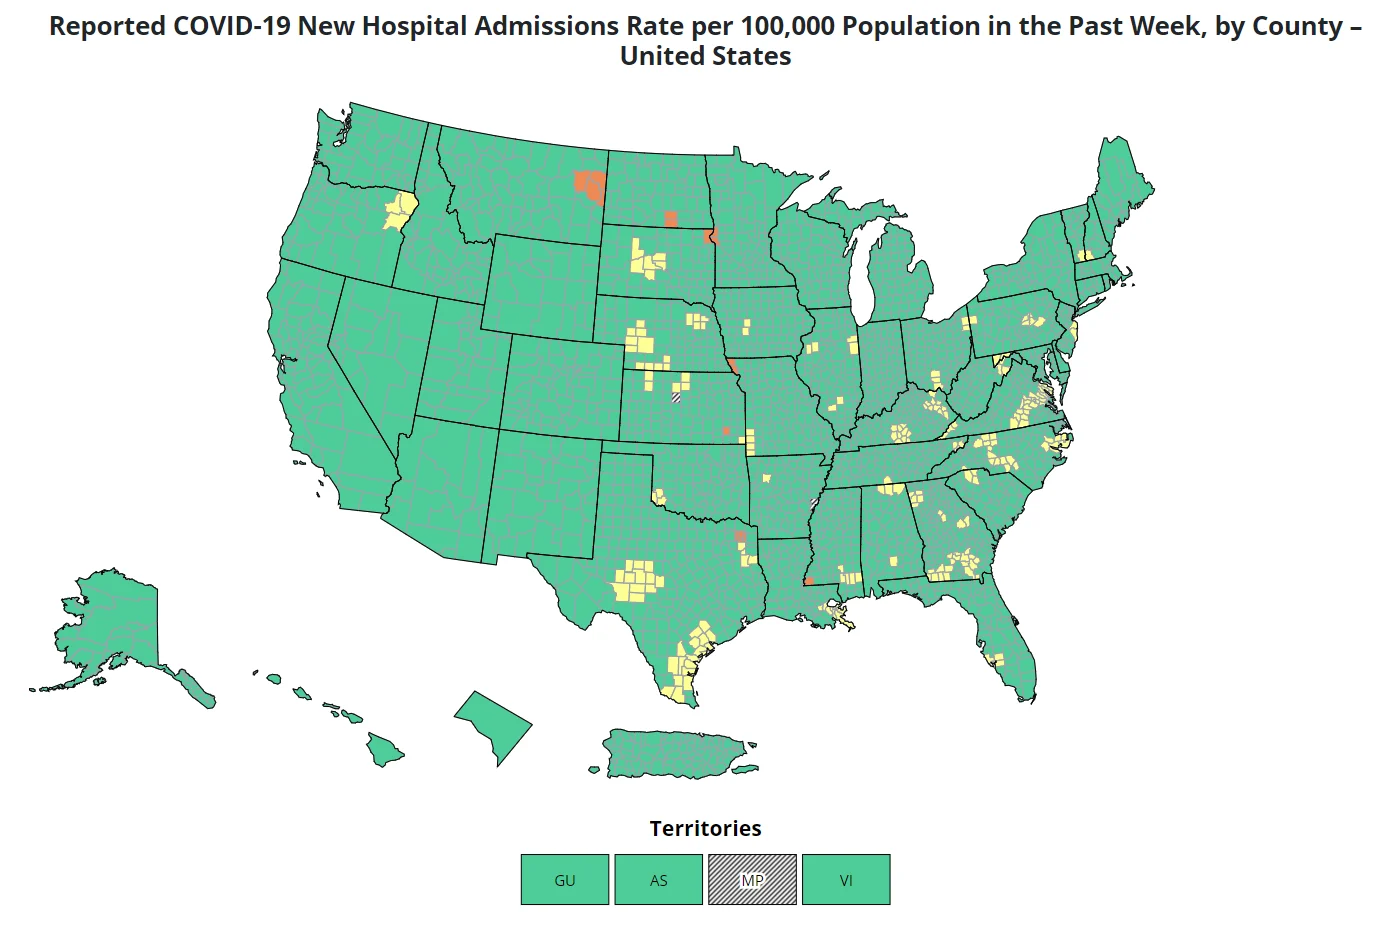 A recent screen capture from the CDC Data Tracker of their US data map showing COVID-19 hospital admissions levels by county.